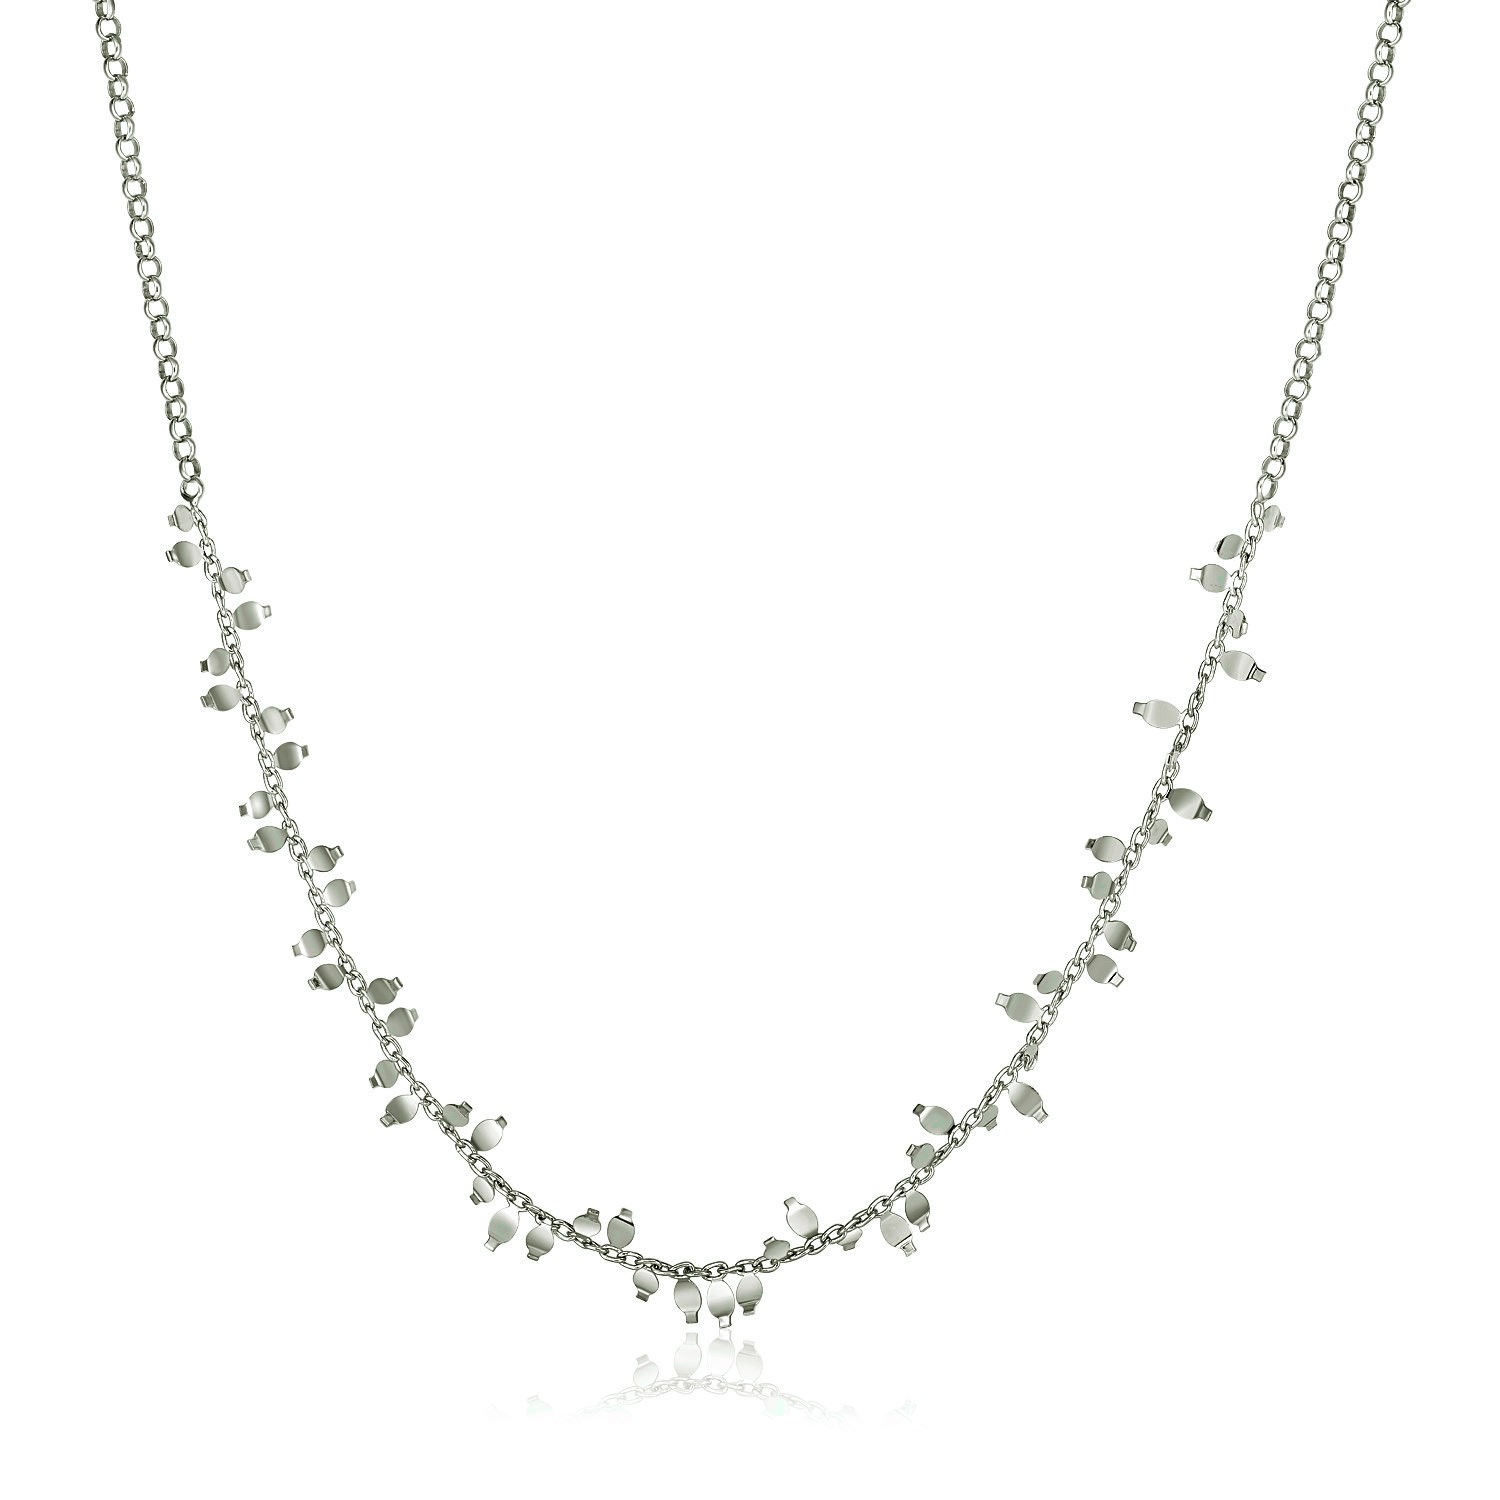 Sterling Silver 18 inch Leaf Motif Chain Necklace - Richard Cannon Jewelry